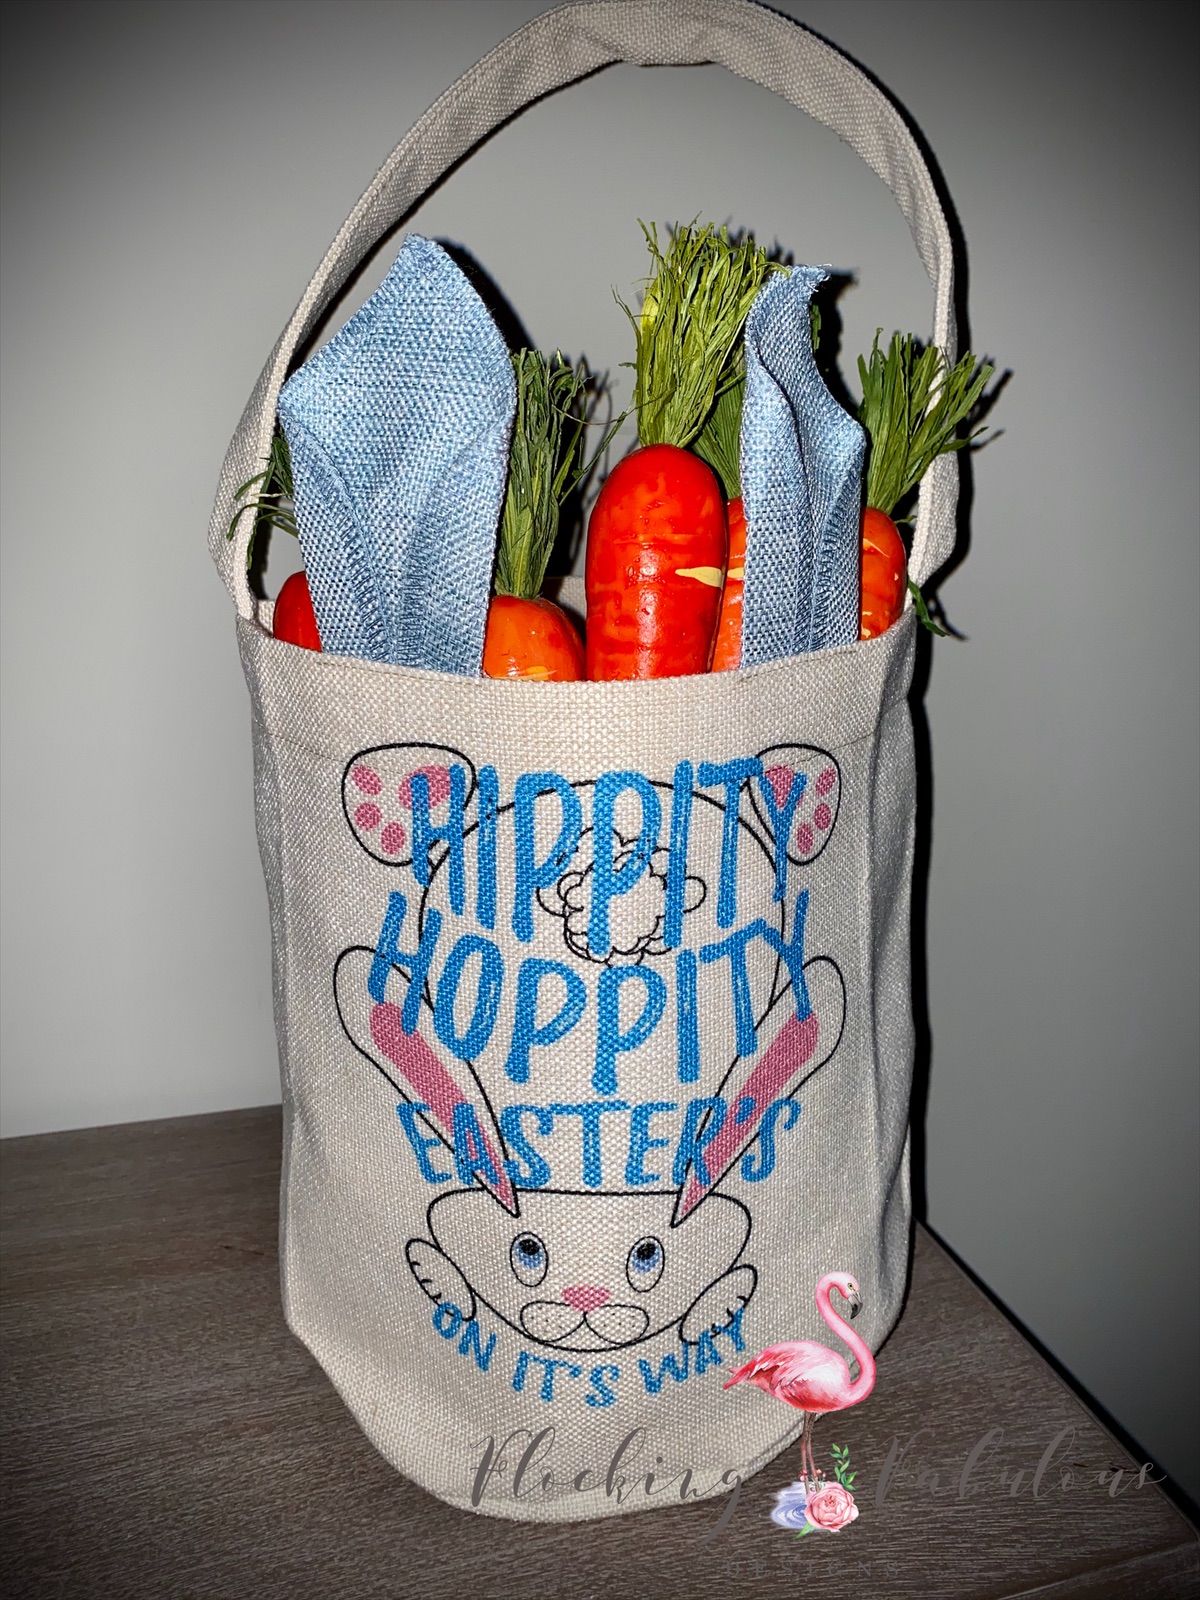 Easter basket made with sublimation printing